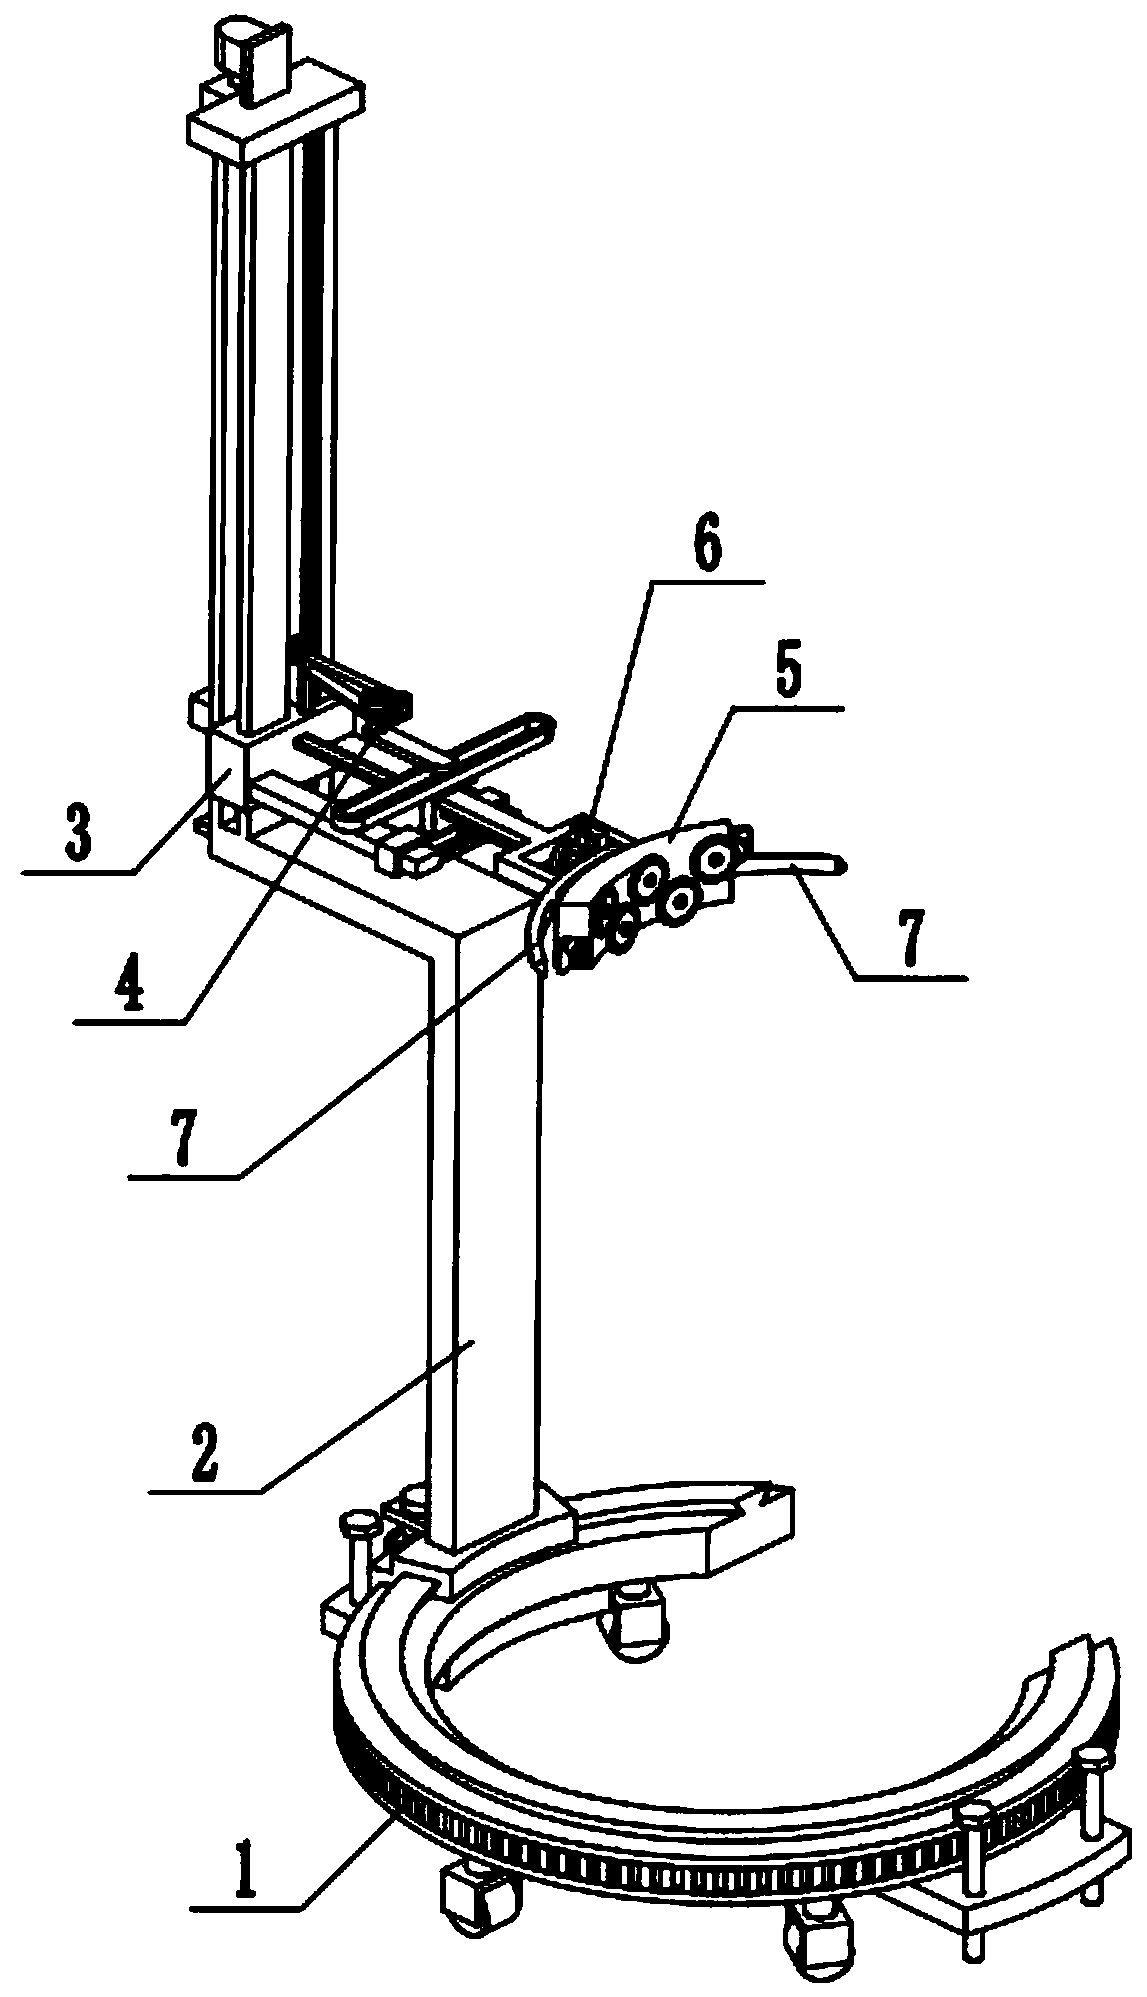 High-position branch pruning device